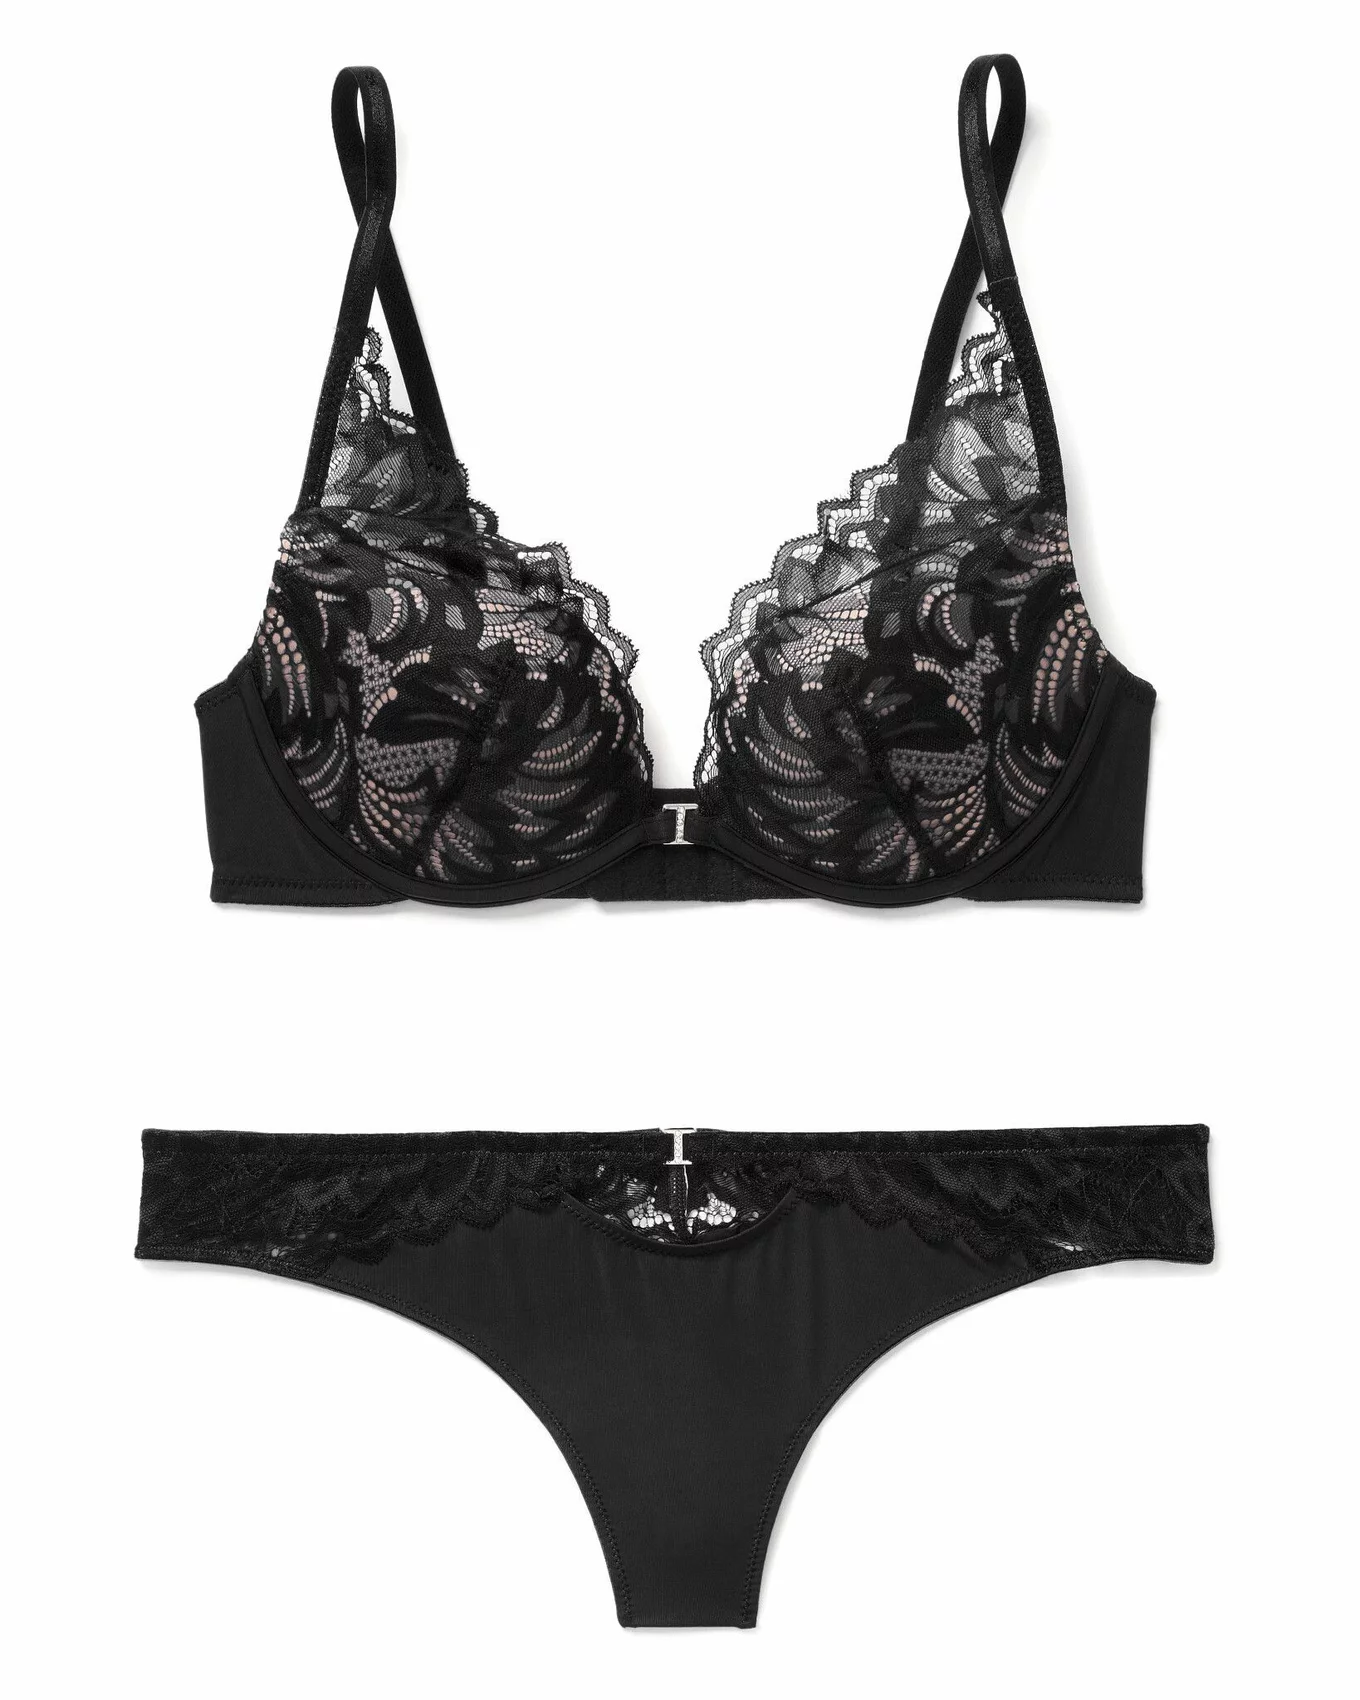 Lily Lace Bra & Panty with Side Support (FGH Cup)